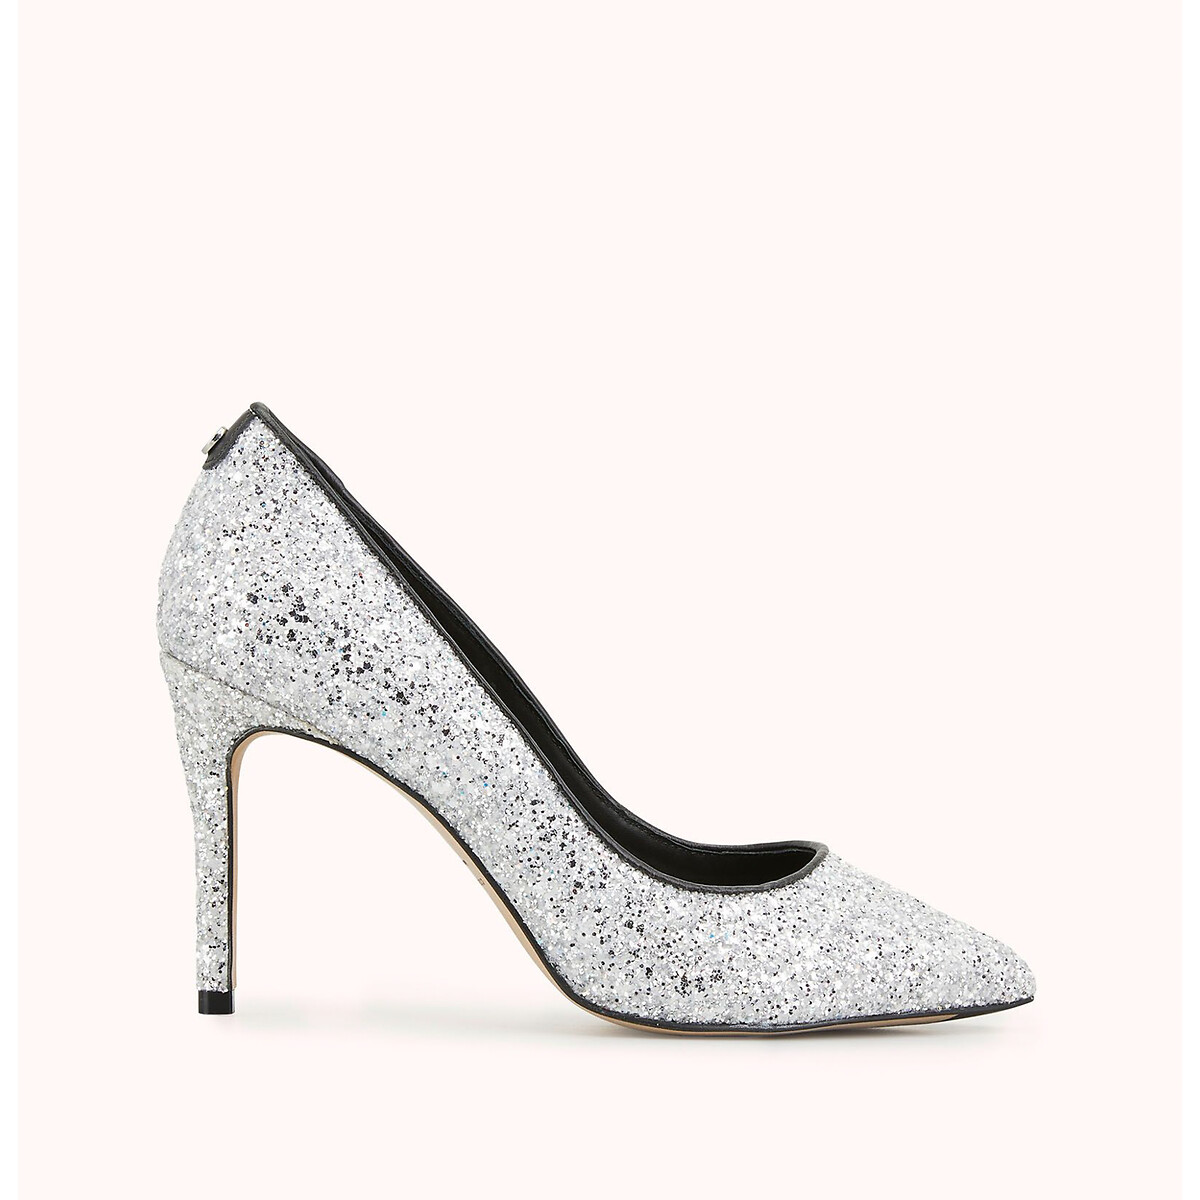 Azoa Glittery Leather Heels with Pointed Toe